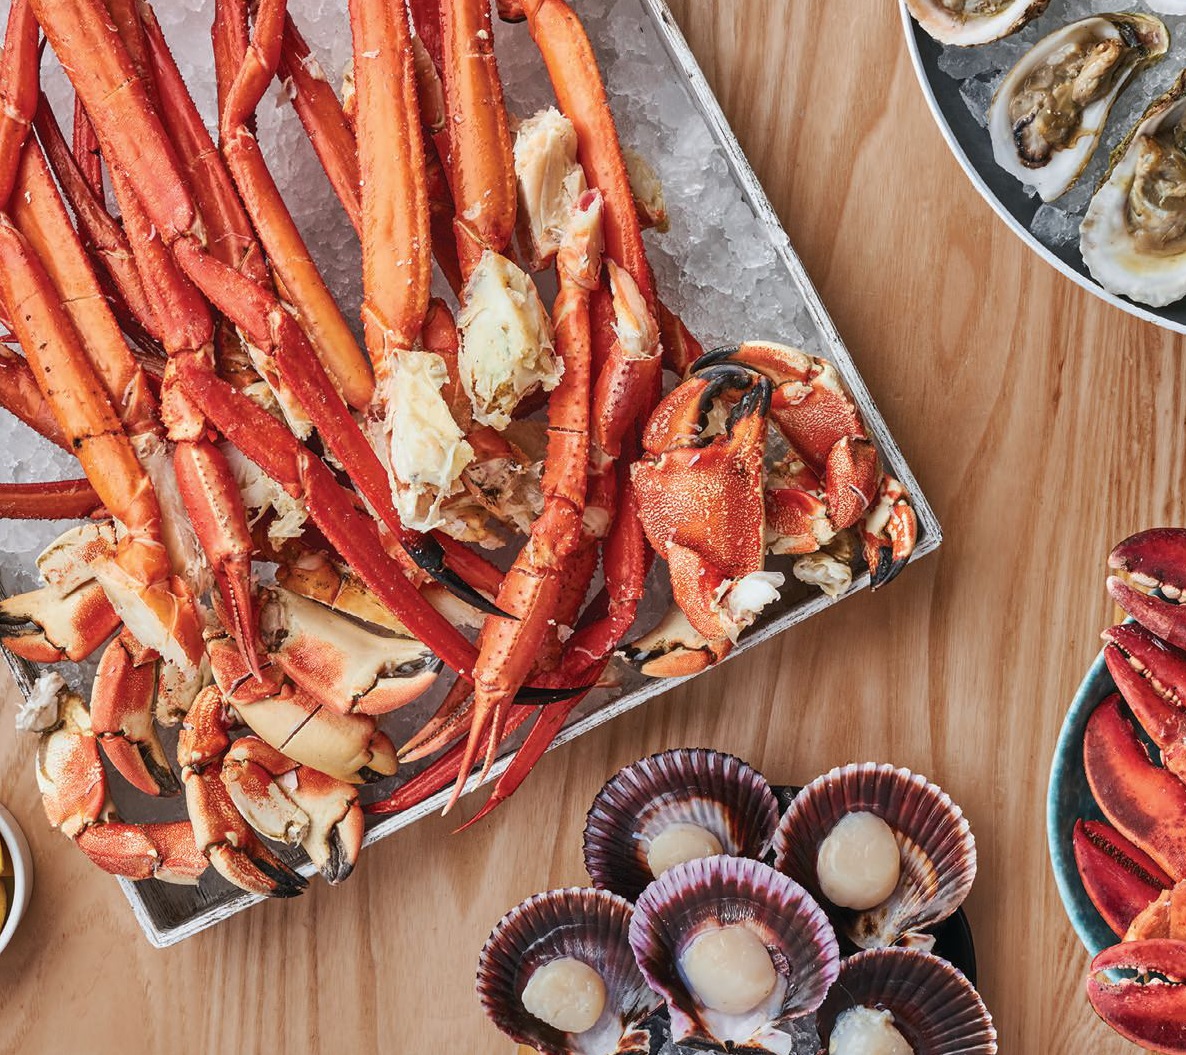 Crab, lobster, oysters, scallops and more are available at Bacchanal Buffet at Caesars Palace. PHOTO BY DOUGLAS FRIEDMAN